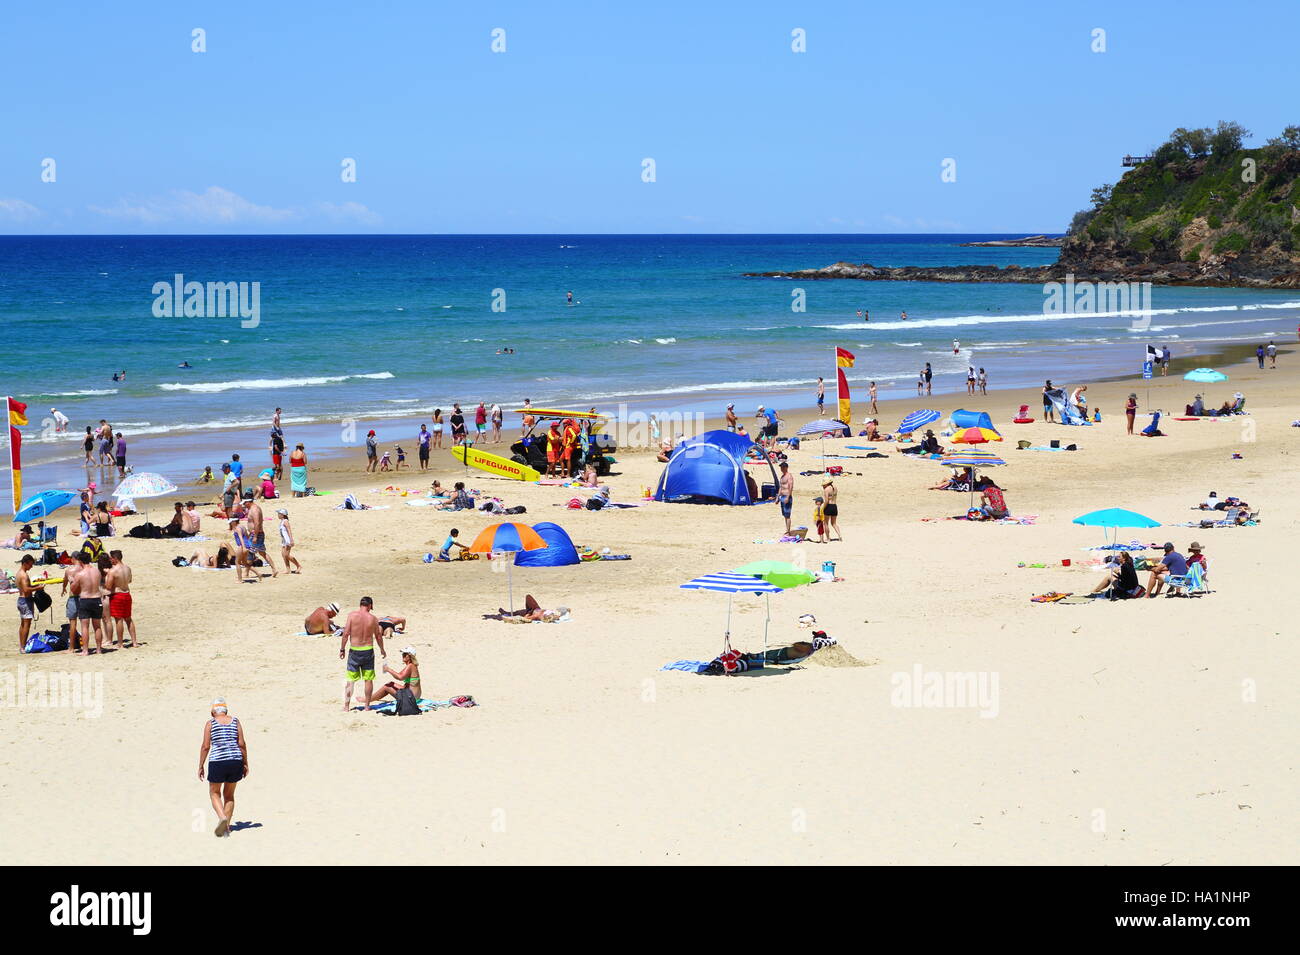 A crowd of people enjoying the beach and ocean at Coolum Beach on the Sunshine Coast, Queensland, Australia. Stock Photo